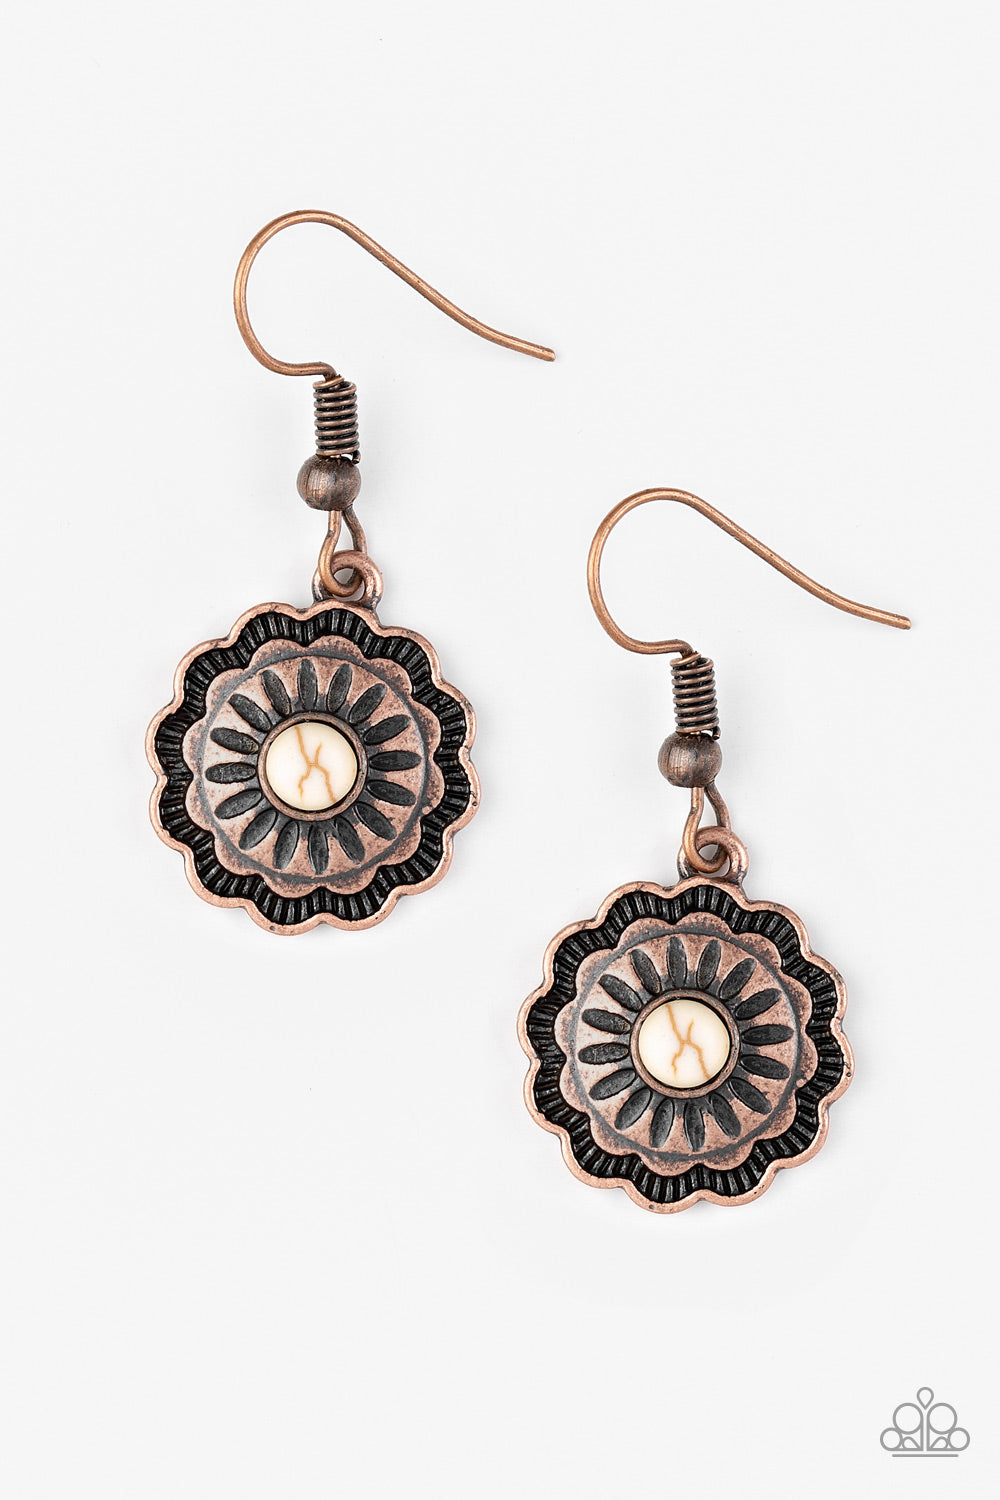 BADLANDS BUTTERCUP - COPPER FLOWER WHITE TURQUOISE DAINTY EARRINGS